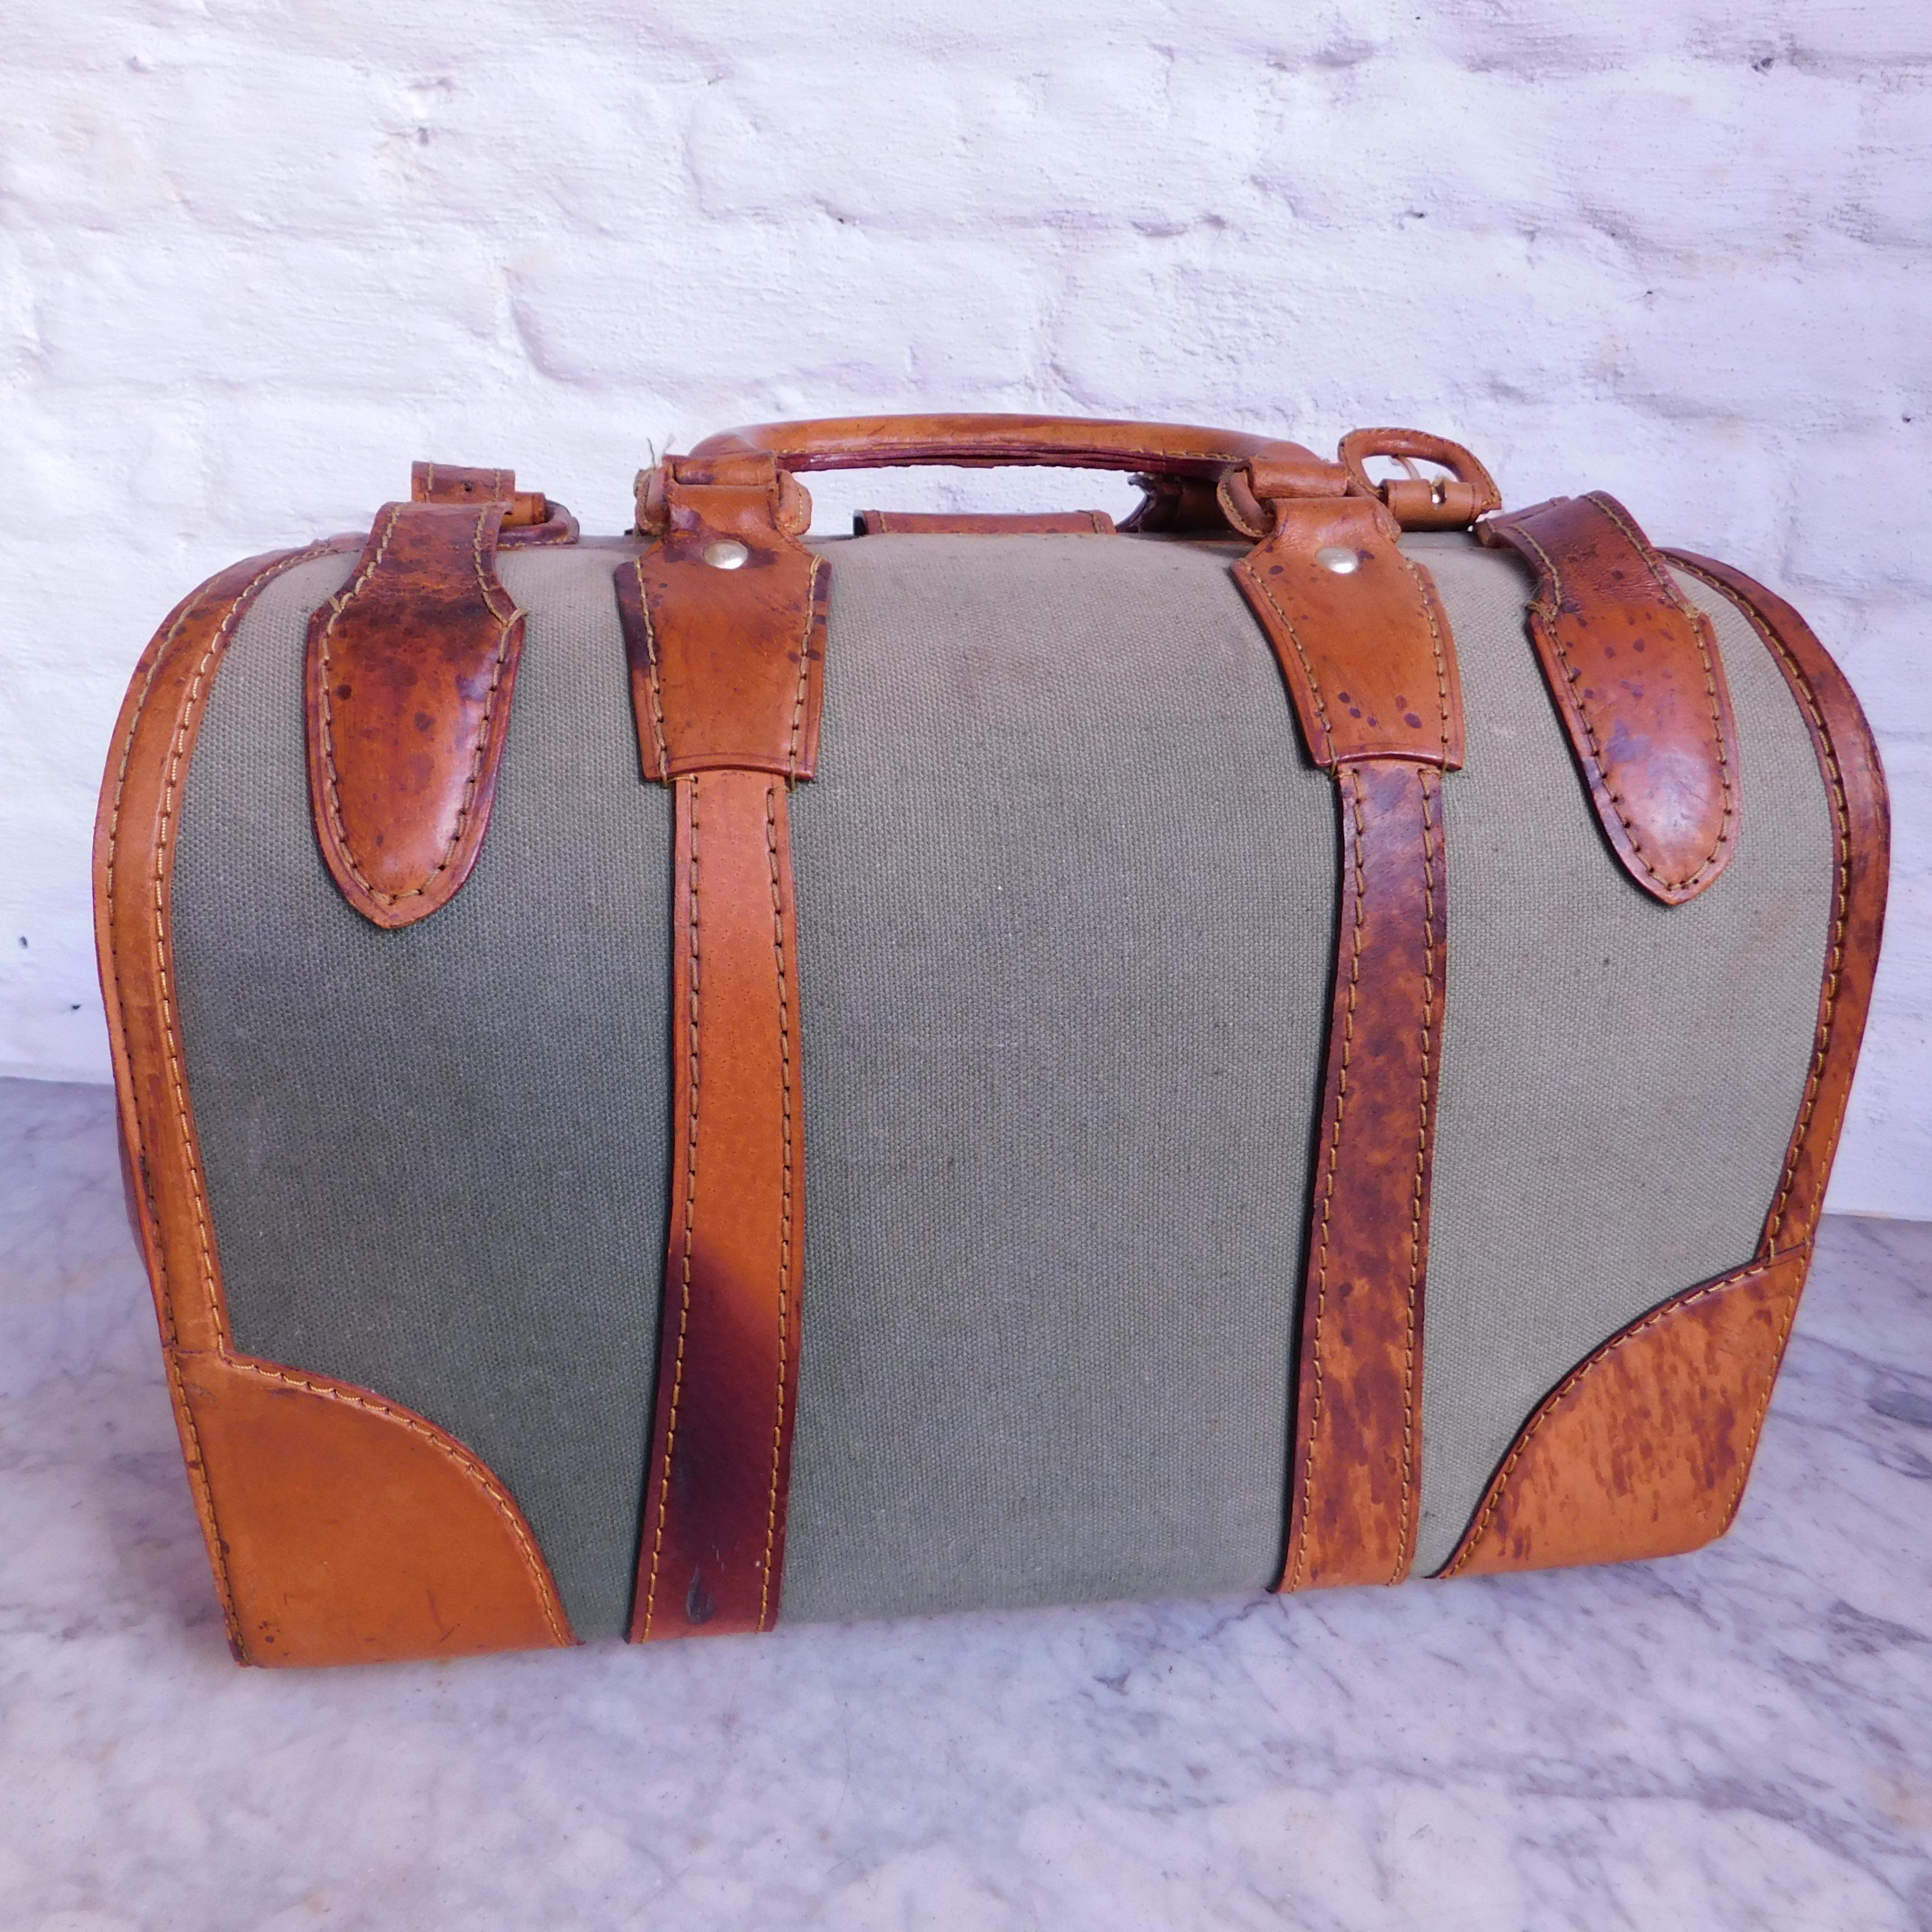 English leather and olive green canvas Gladstone satchel or doctors bag including key.
Great vintage style and very cool to use as a handbag.
 